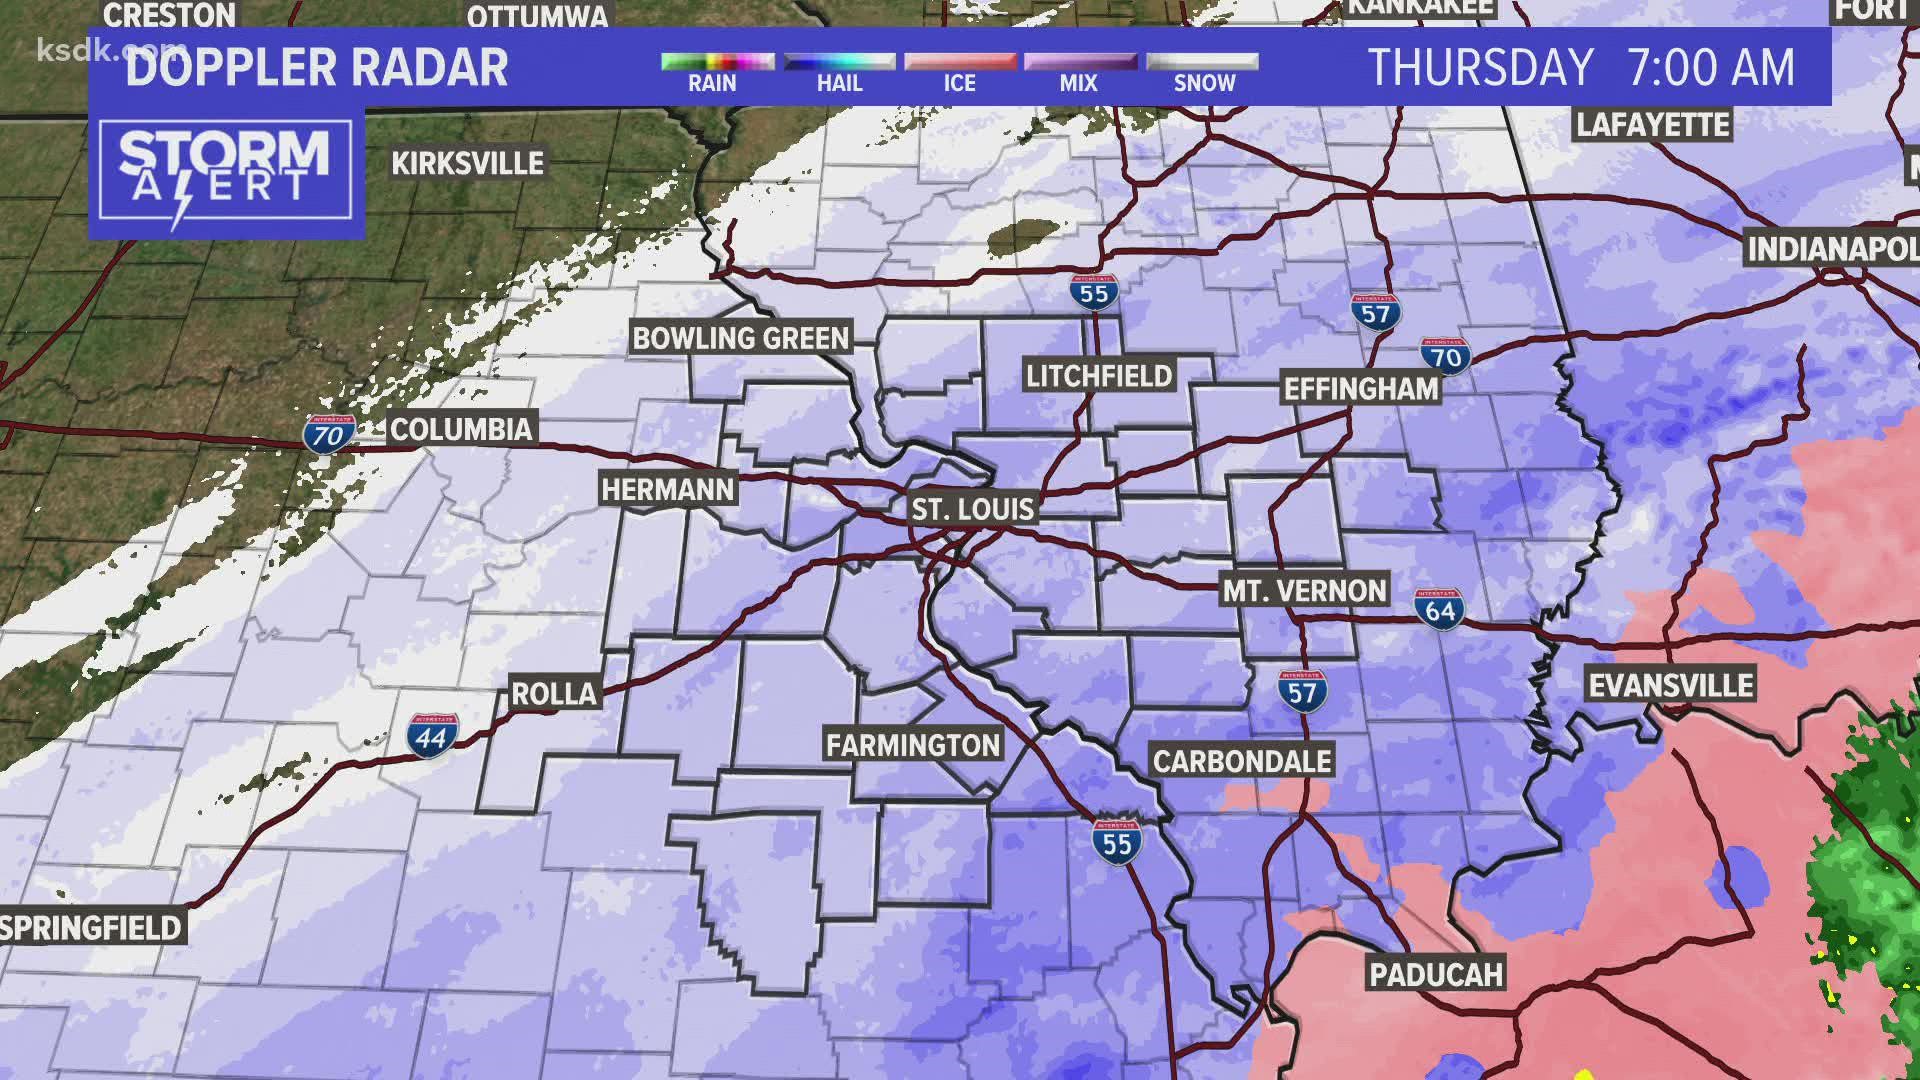 Some locations have already seen 6 inches of snowfall as a winter storm blankets the St. Louis area. Snow showers will linger throughout the day.